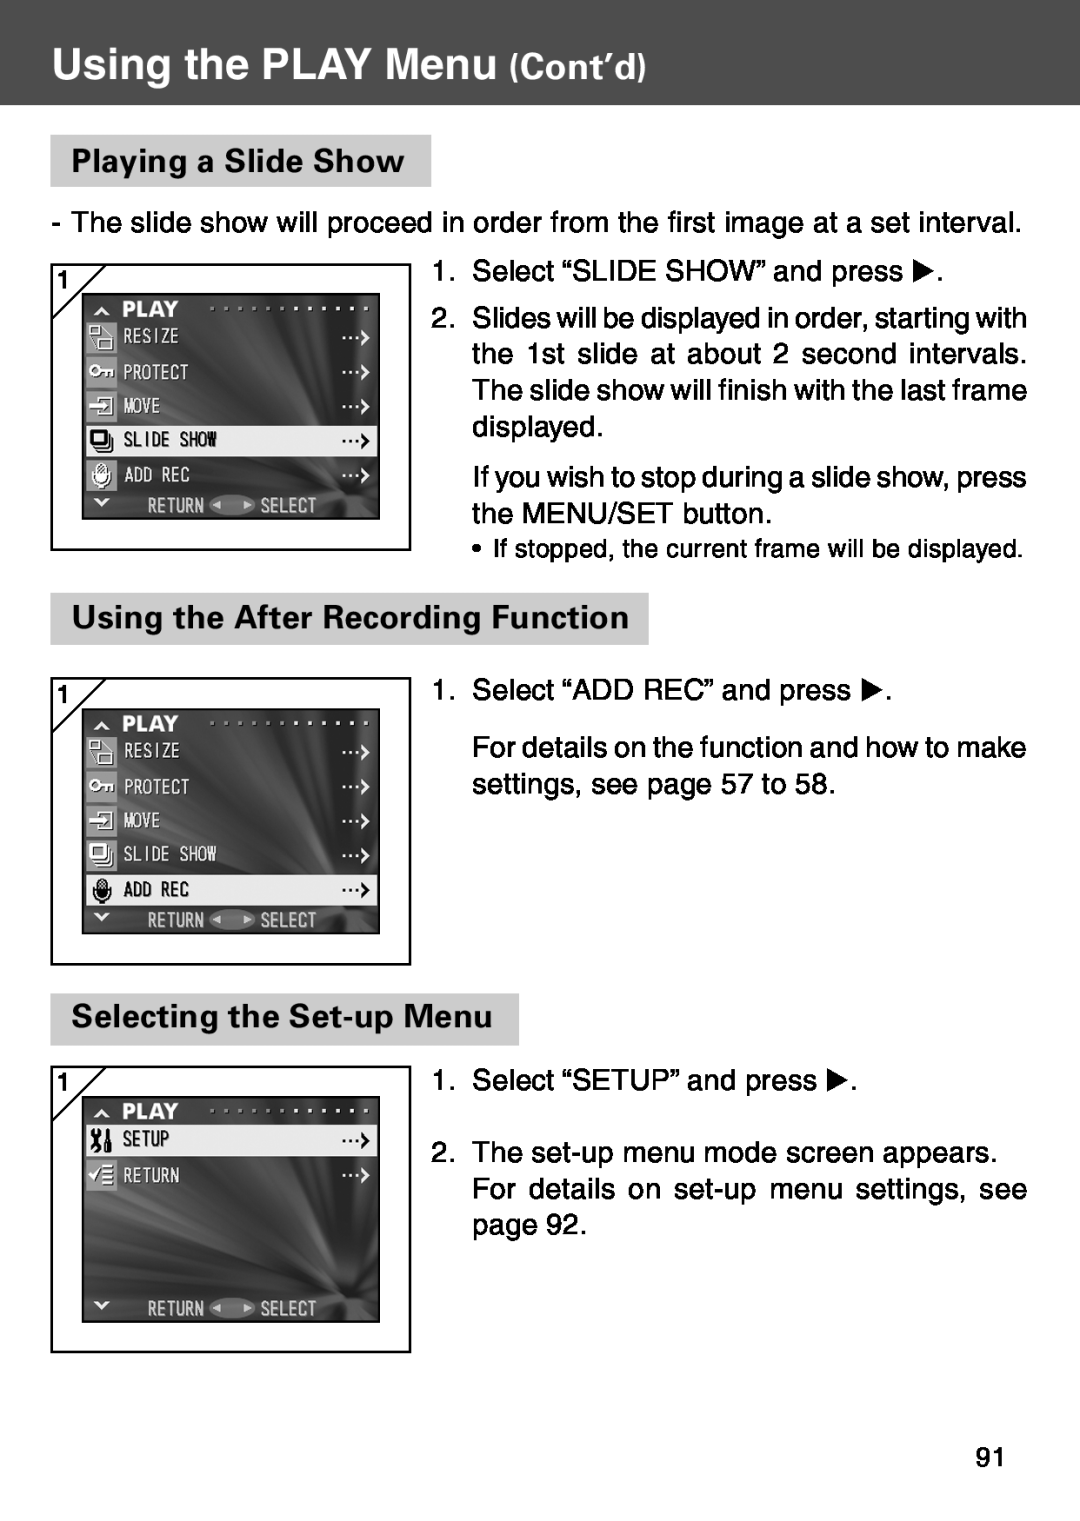 Konica Minolta KD-500Z user manual Playing a Slide Show, Using the After Recording Function, Using the PLAY Menu Cont’d 